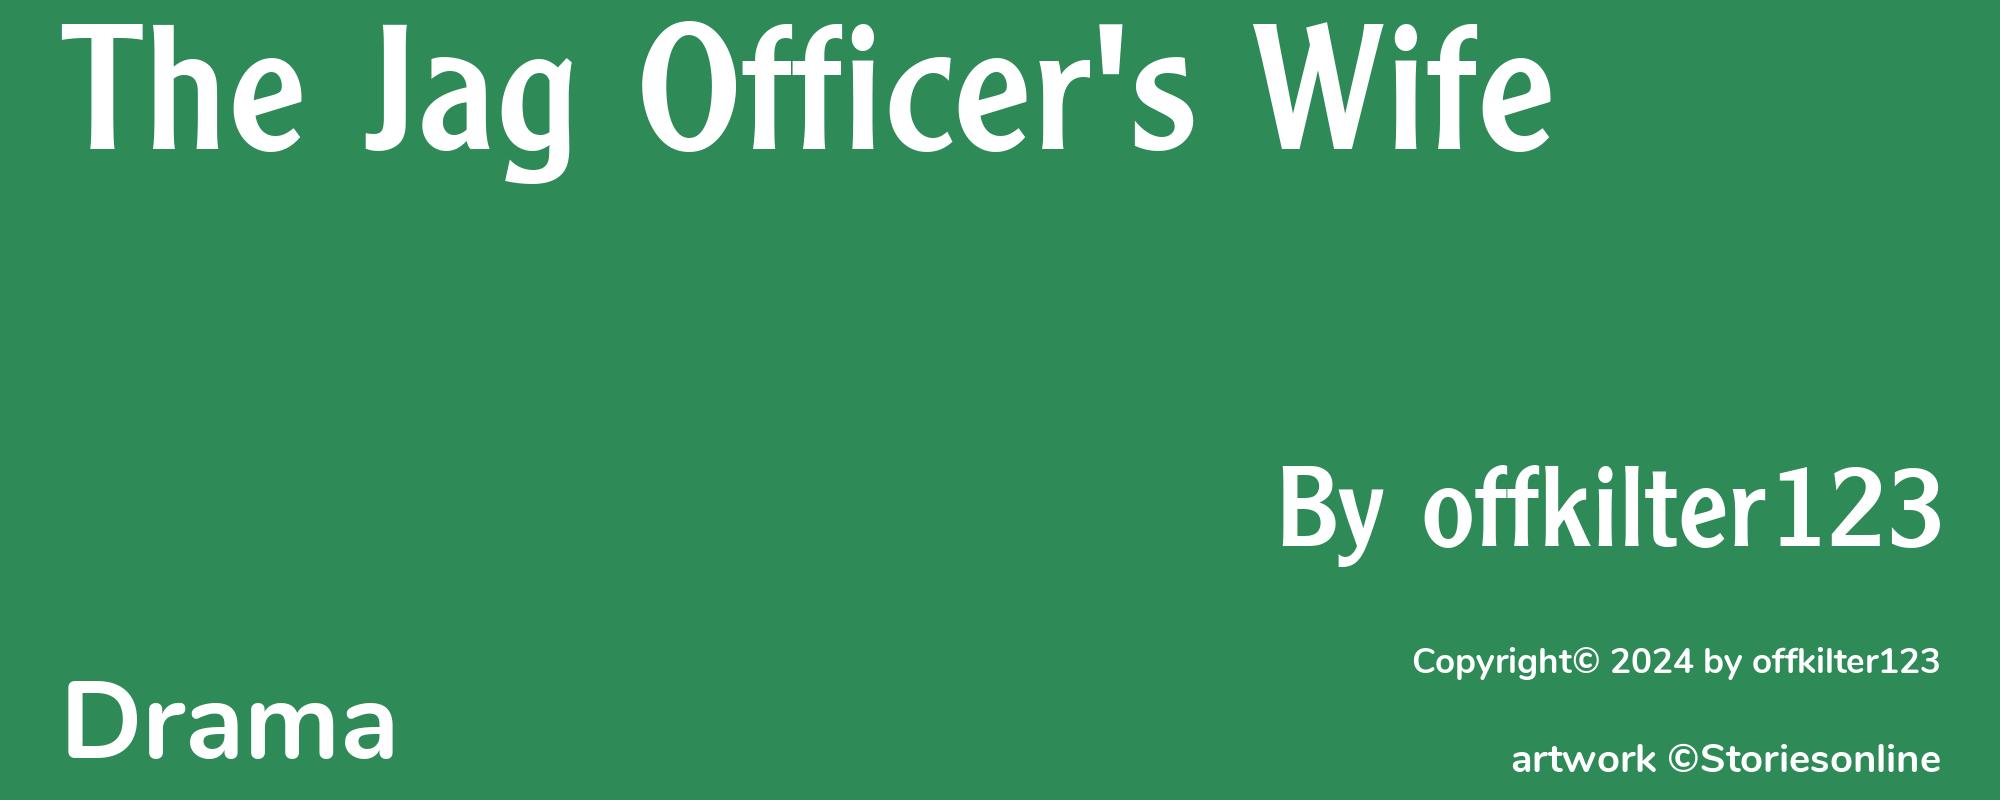 The Jag Officer's Wife - Cover